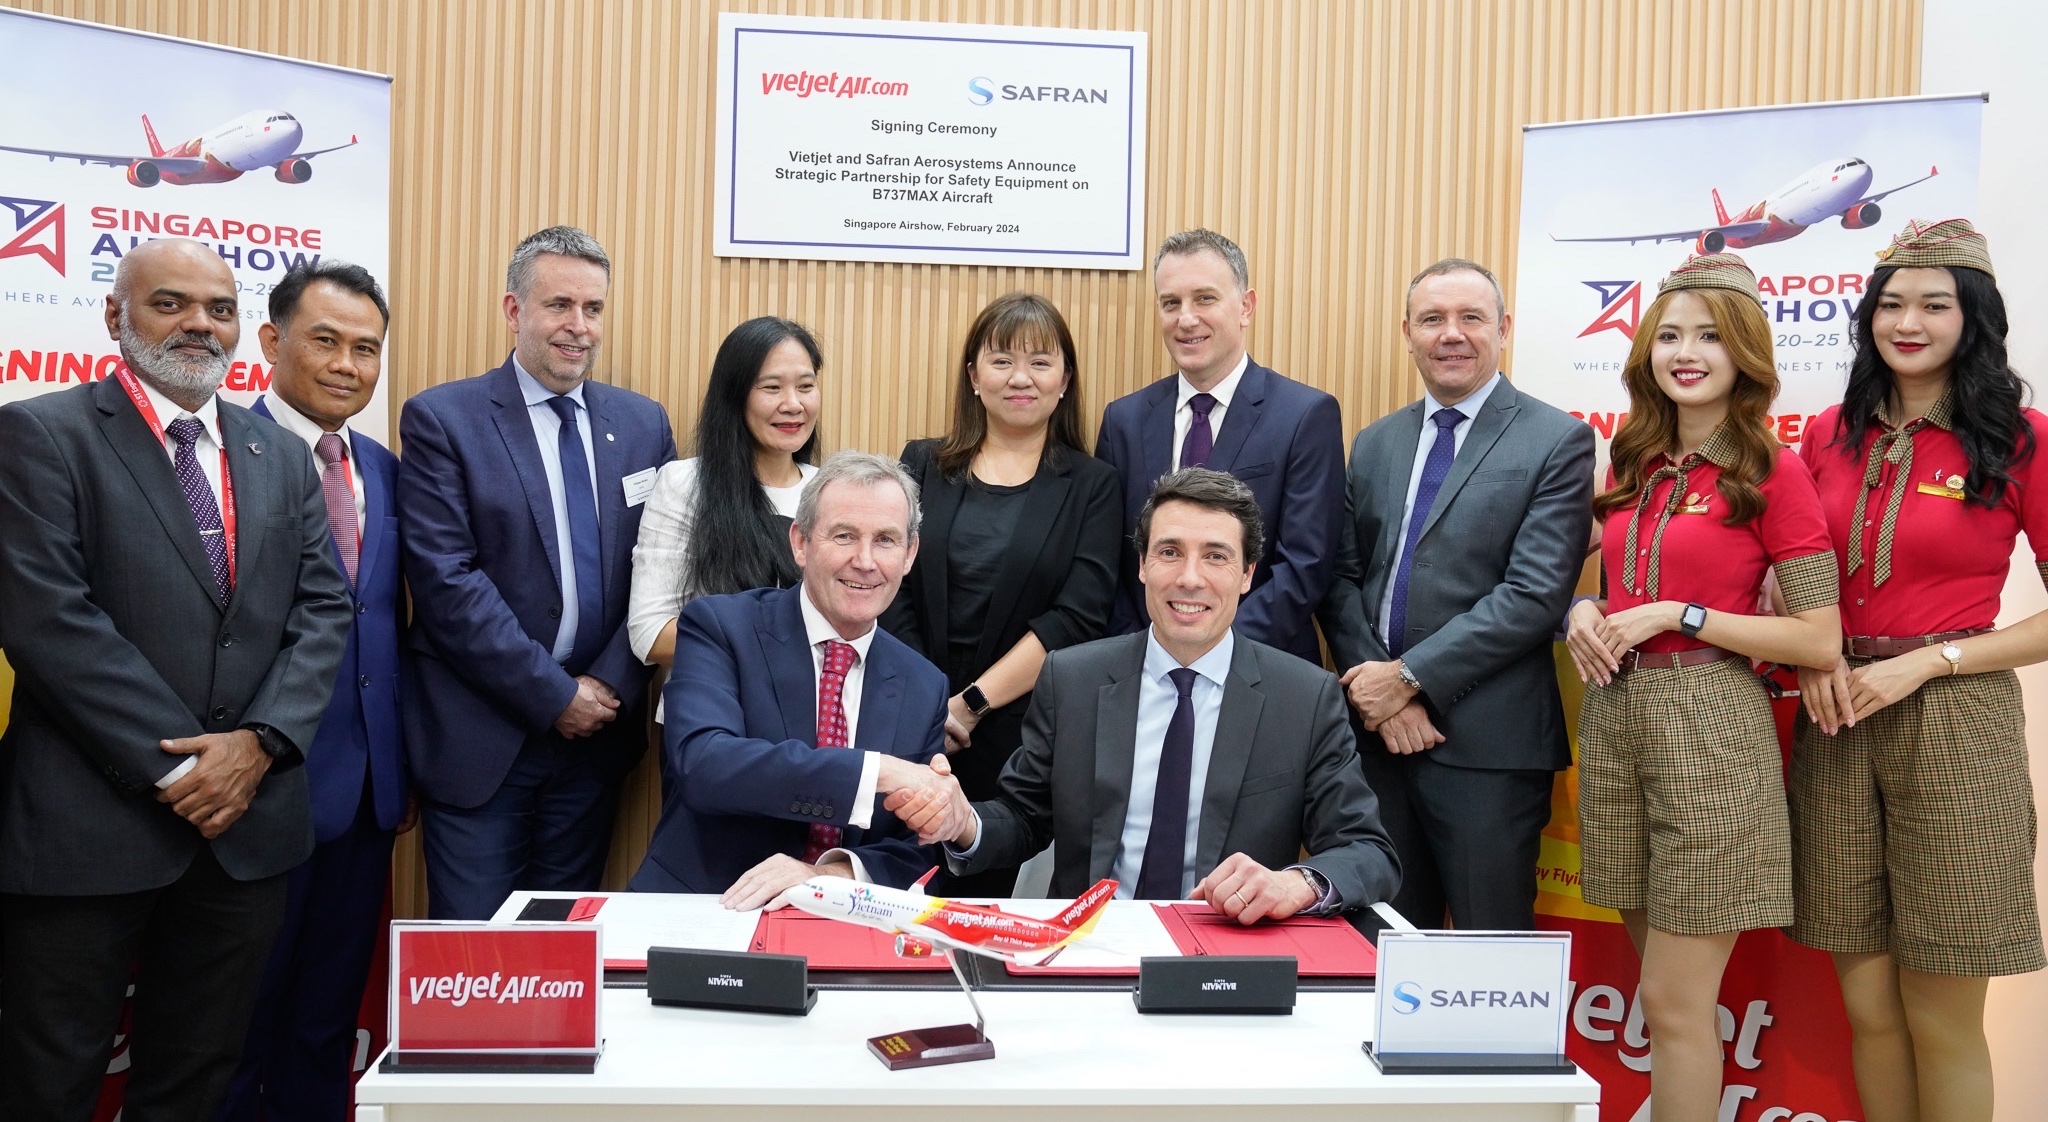 Vietjet_Chief_Operating_Officer_Michael_Hickey_left_and_Jonathan (1)